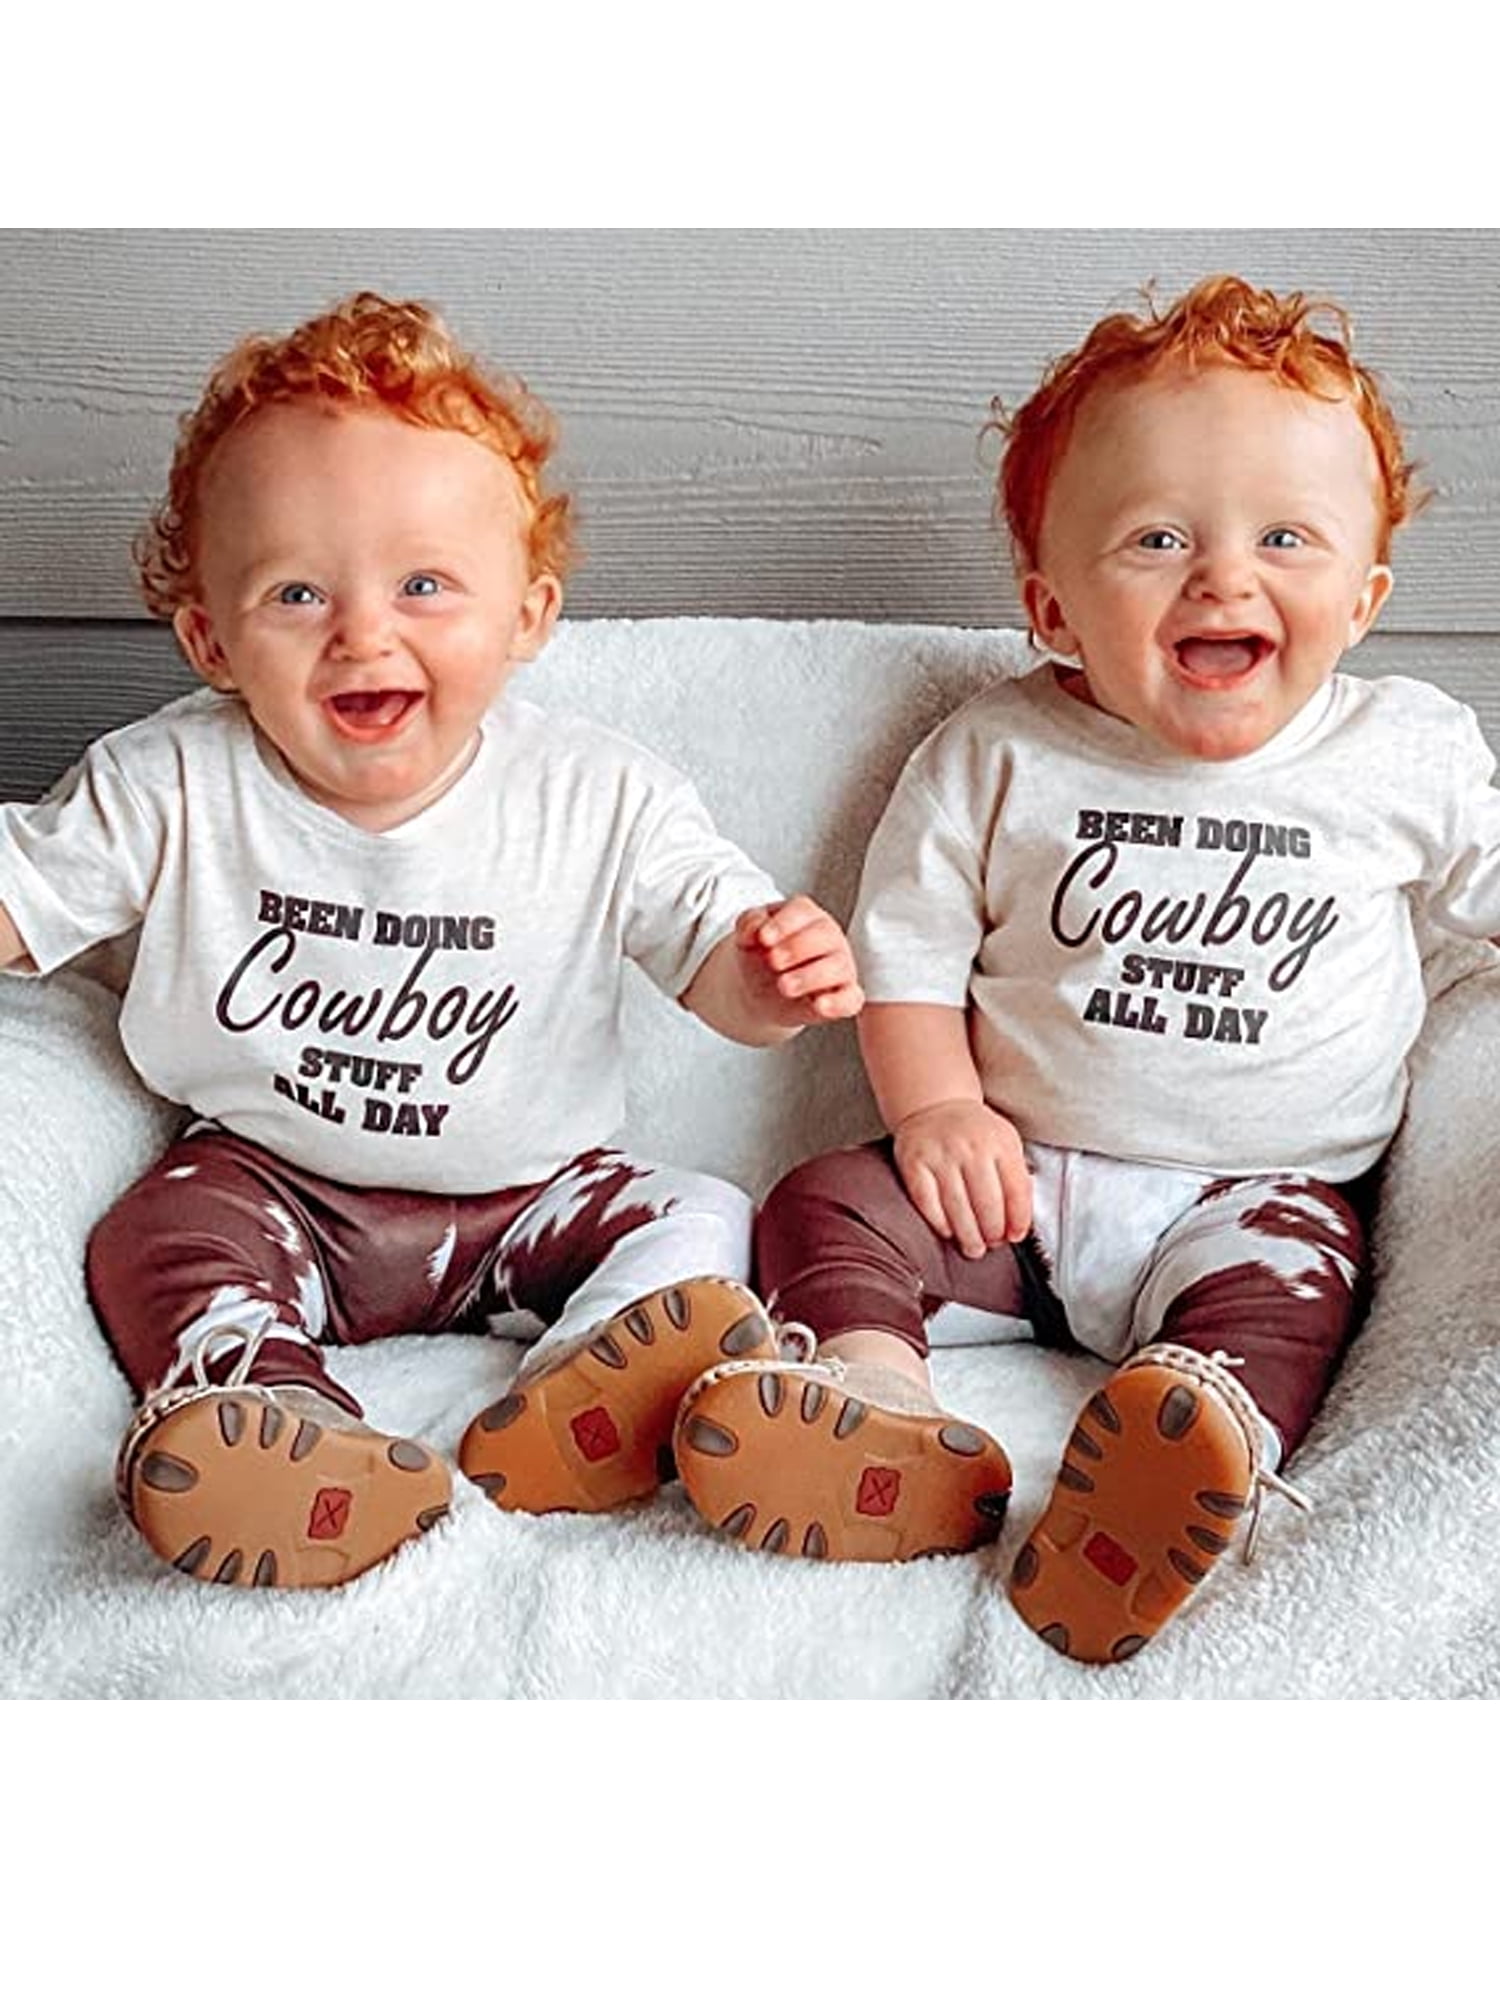 Amiblvowa Cute Western Baby Boy Summer Clothes Cow Print T Shirt Jogger Shorts Set Newborn Toddler Cowboy Country Outfit